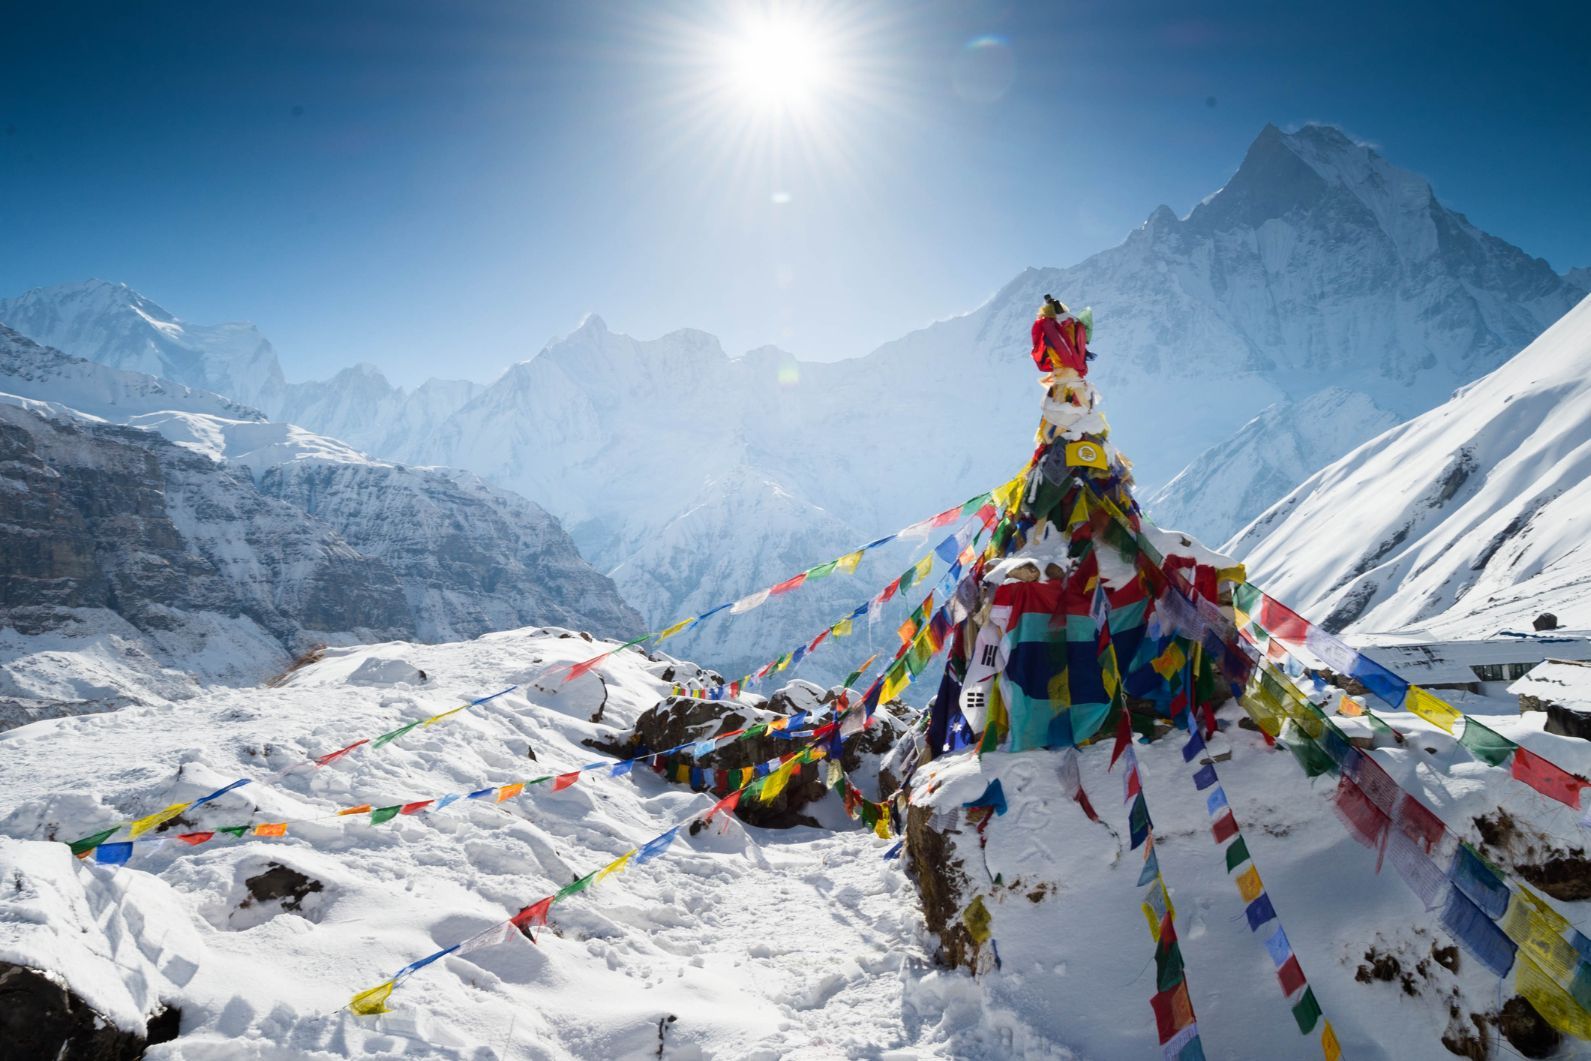 A stunning, snowy high-altitude view from Annapurna Base Camp. Photo: Getty